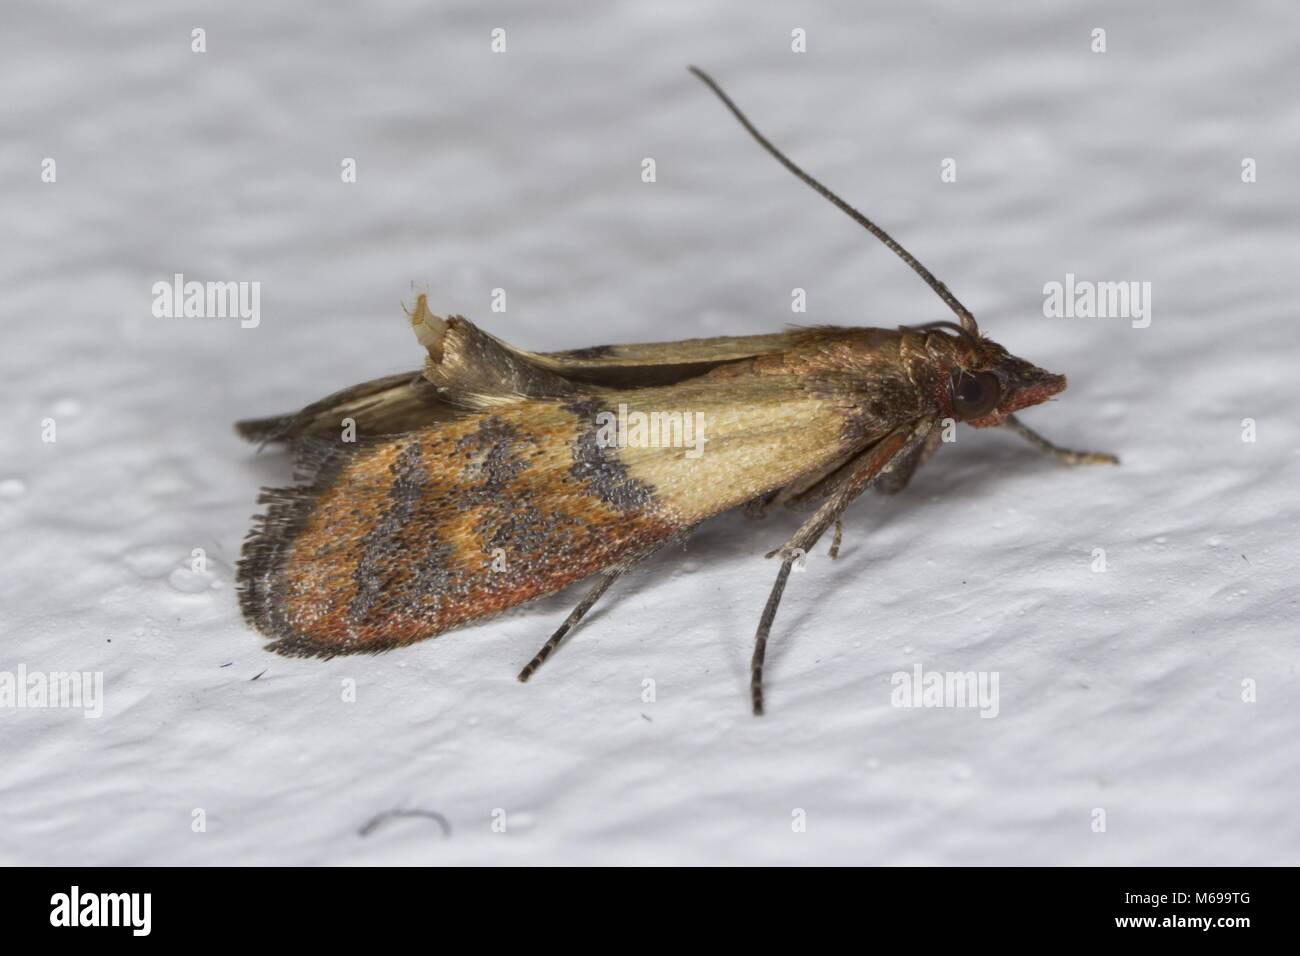 Moth of indian mealmoth or Indianmeal moth - Plodia interpunctella on wall. It is common pest of stored products and pest of food in homes. Stock Photo